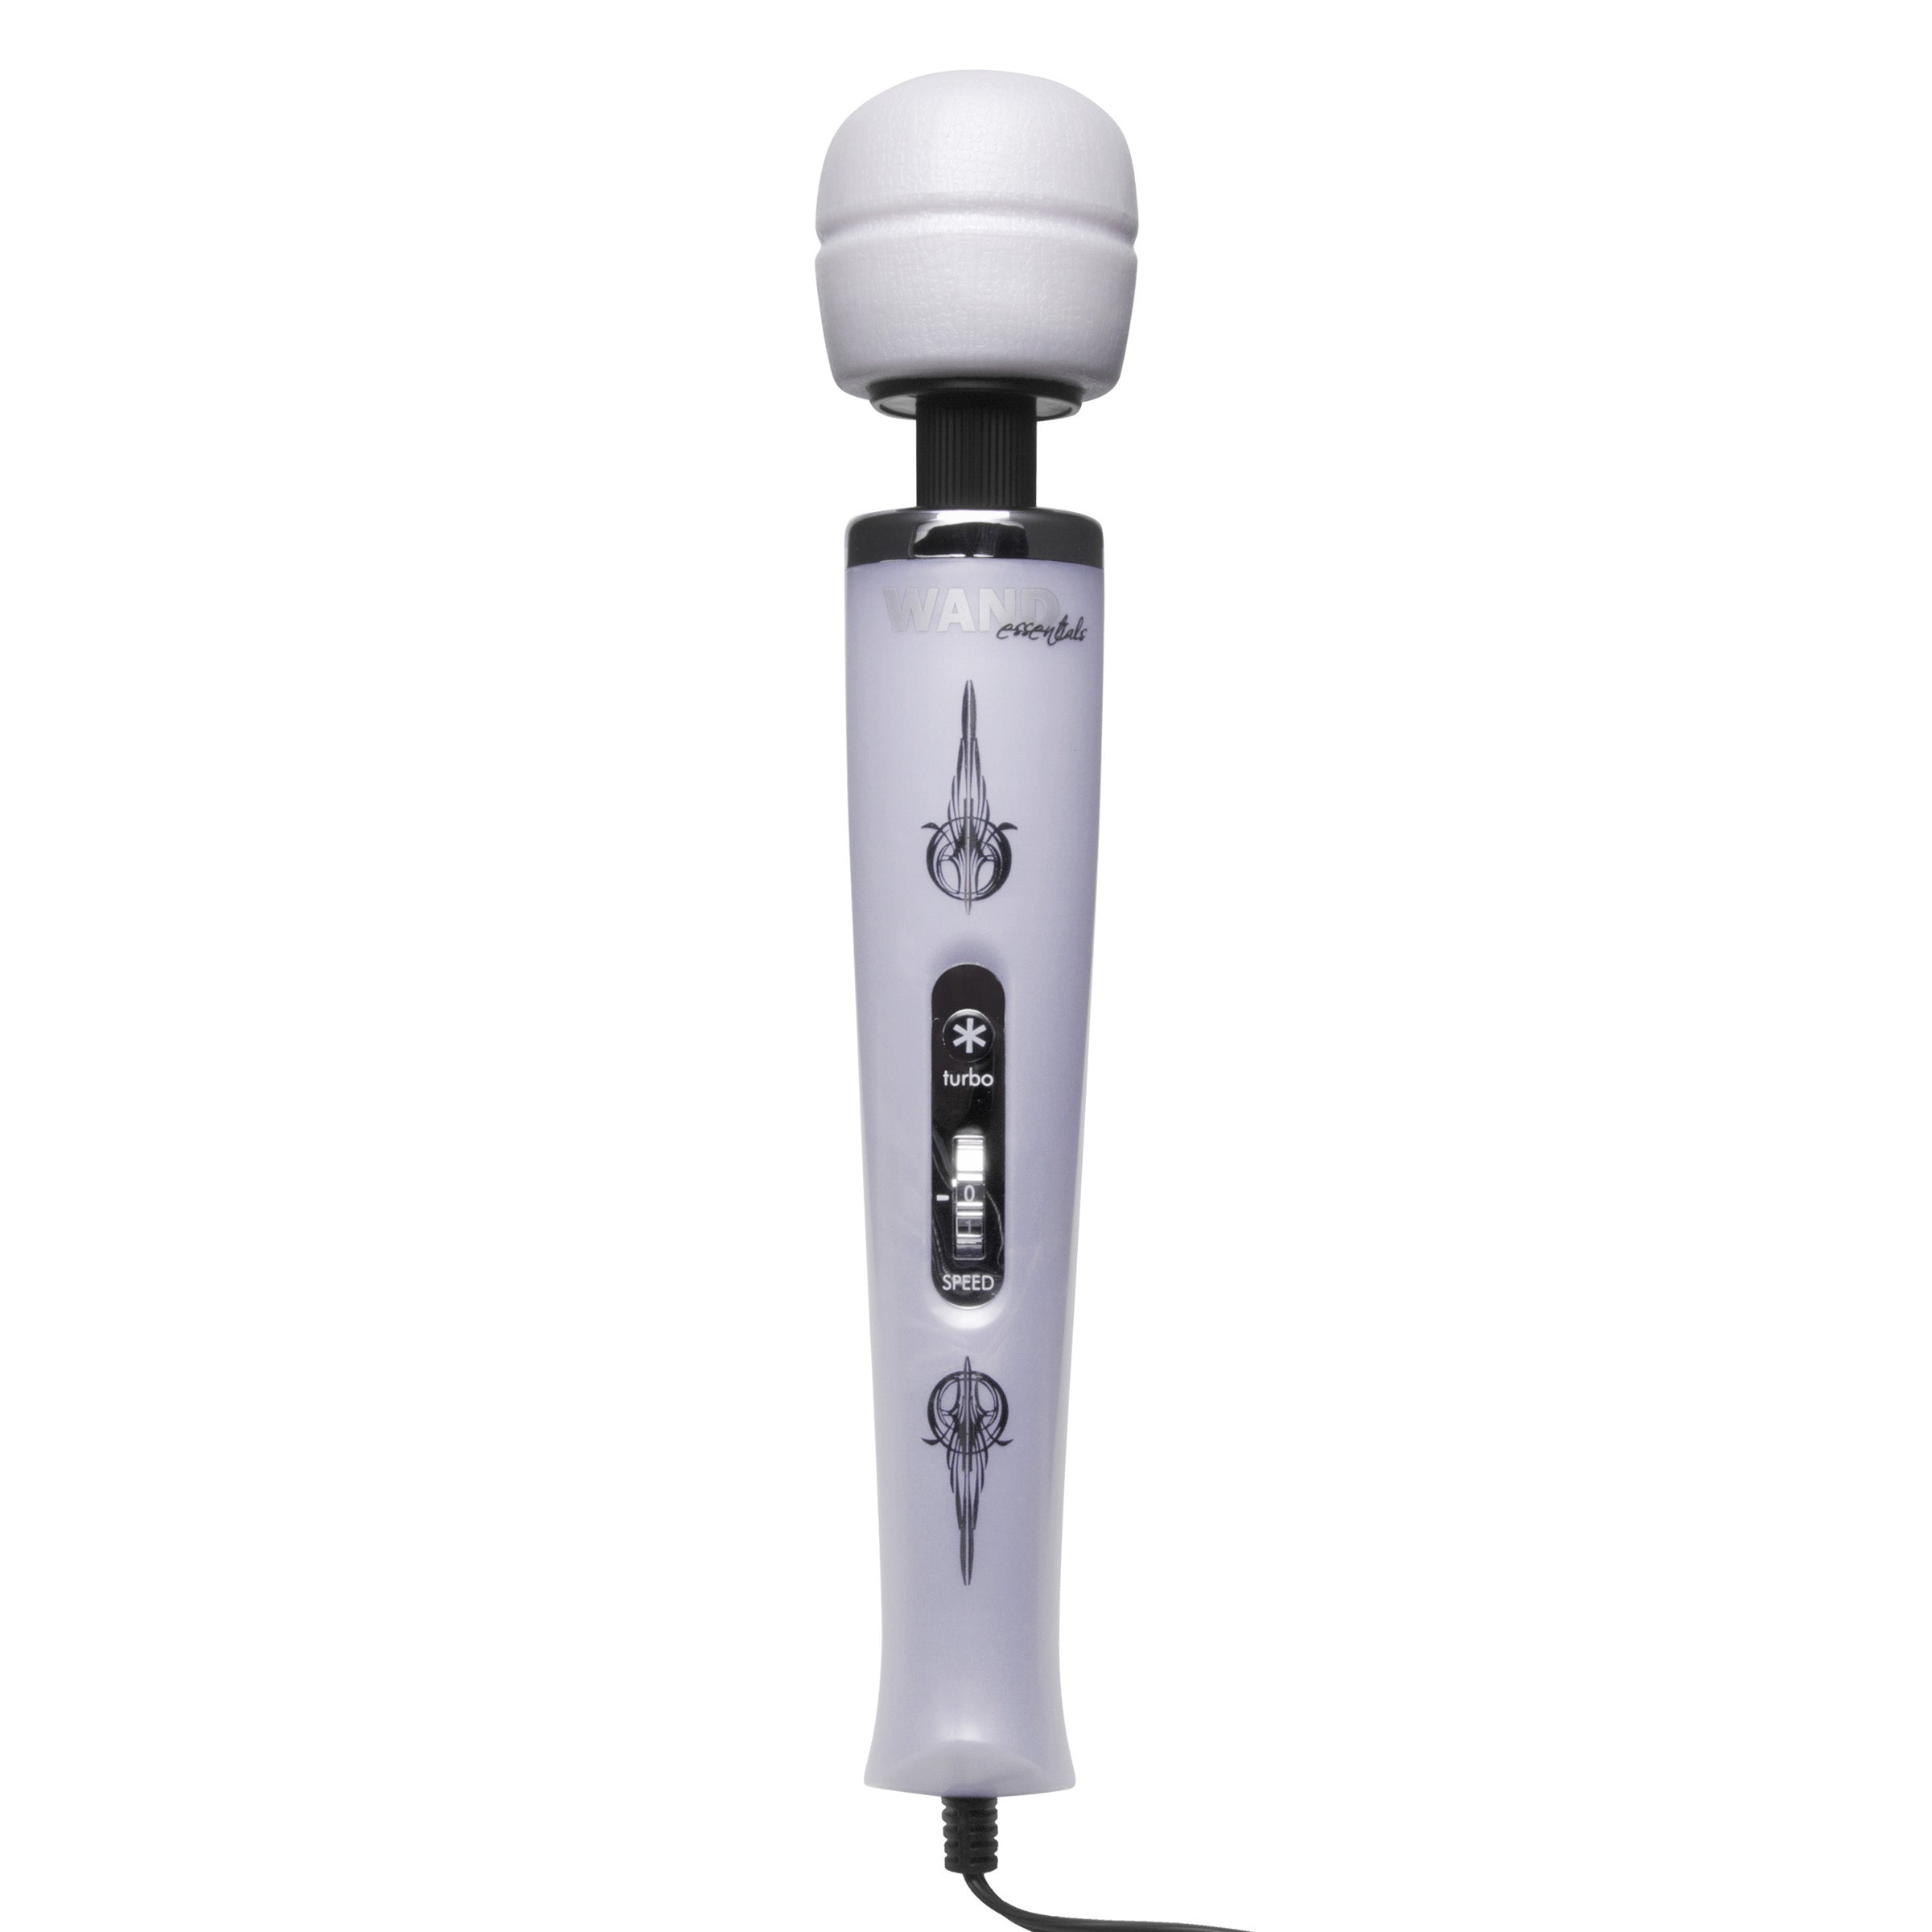 7-Speed Corded Wand Massager by Wand Essentials